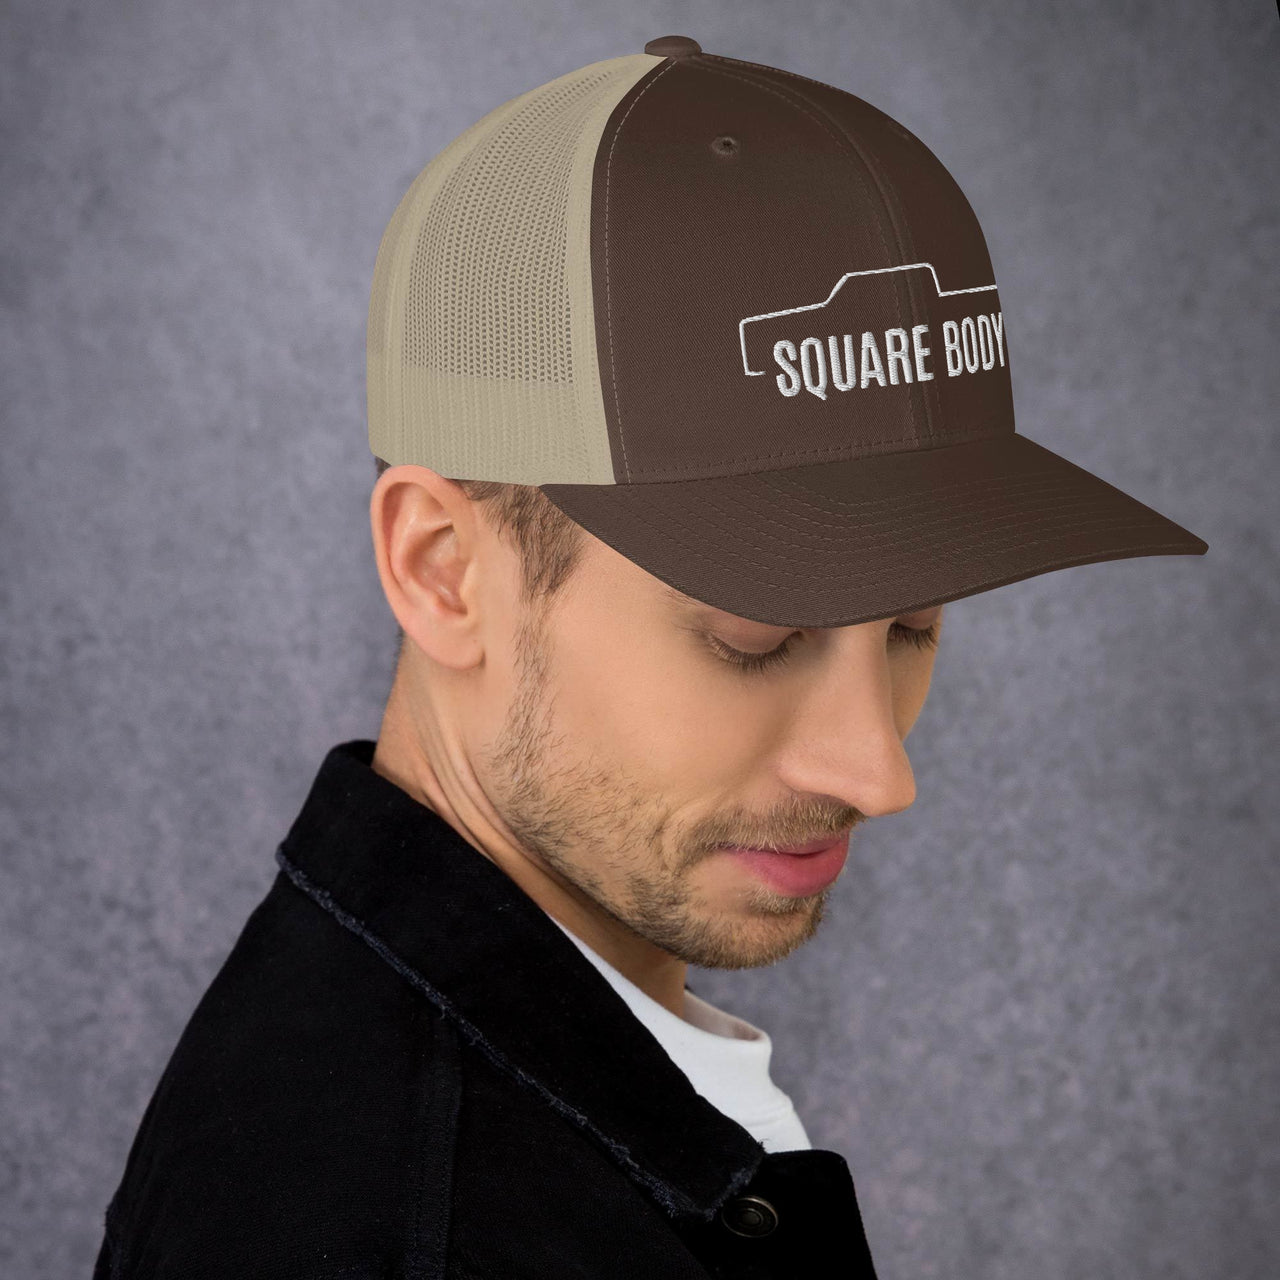 Man wearing a Crew Cab Square Body Trucker Hat From Aggressive Thread in Brown